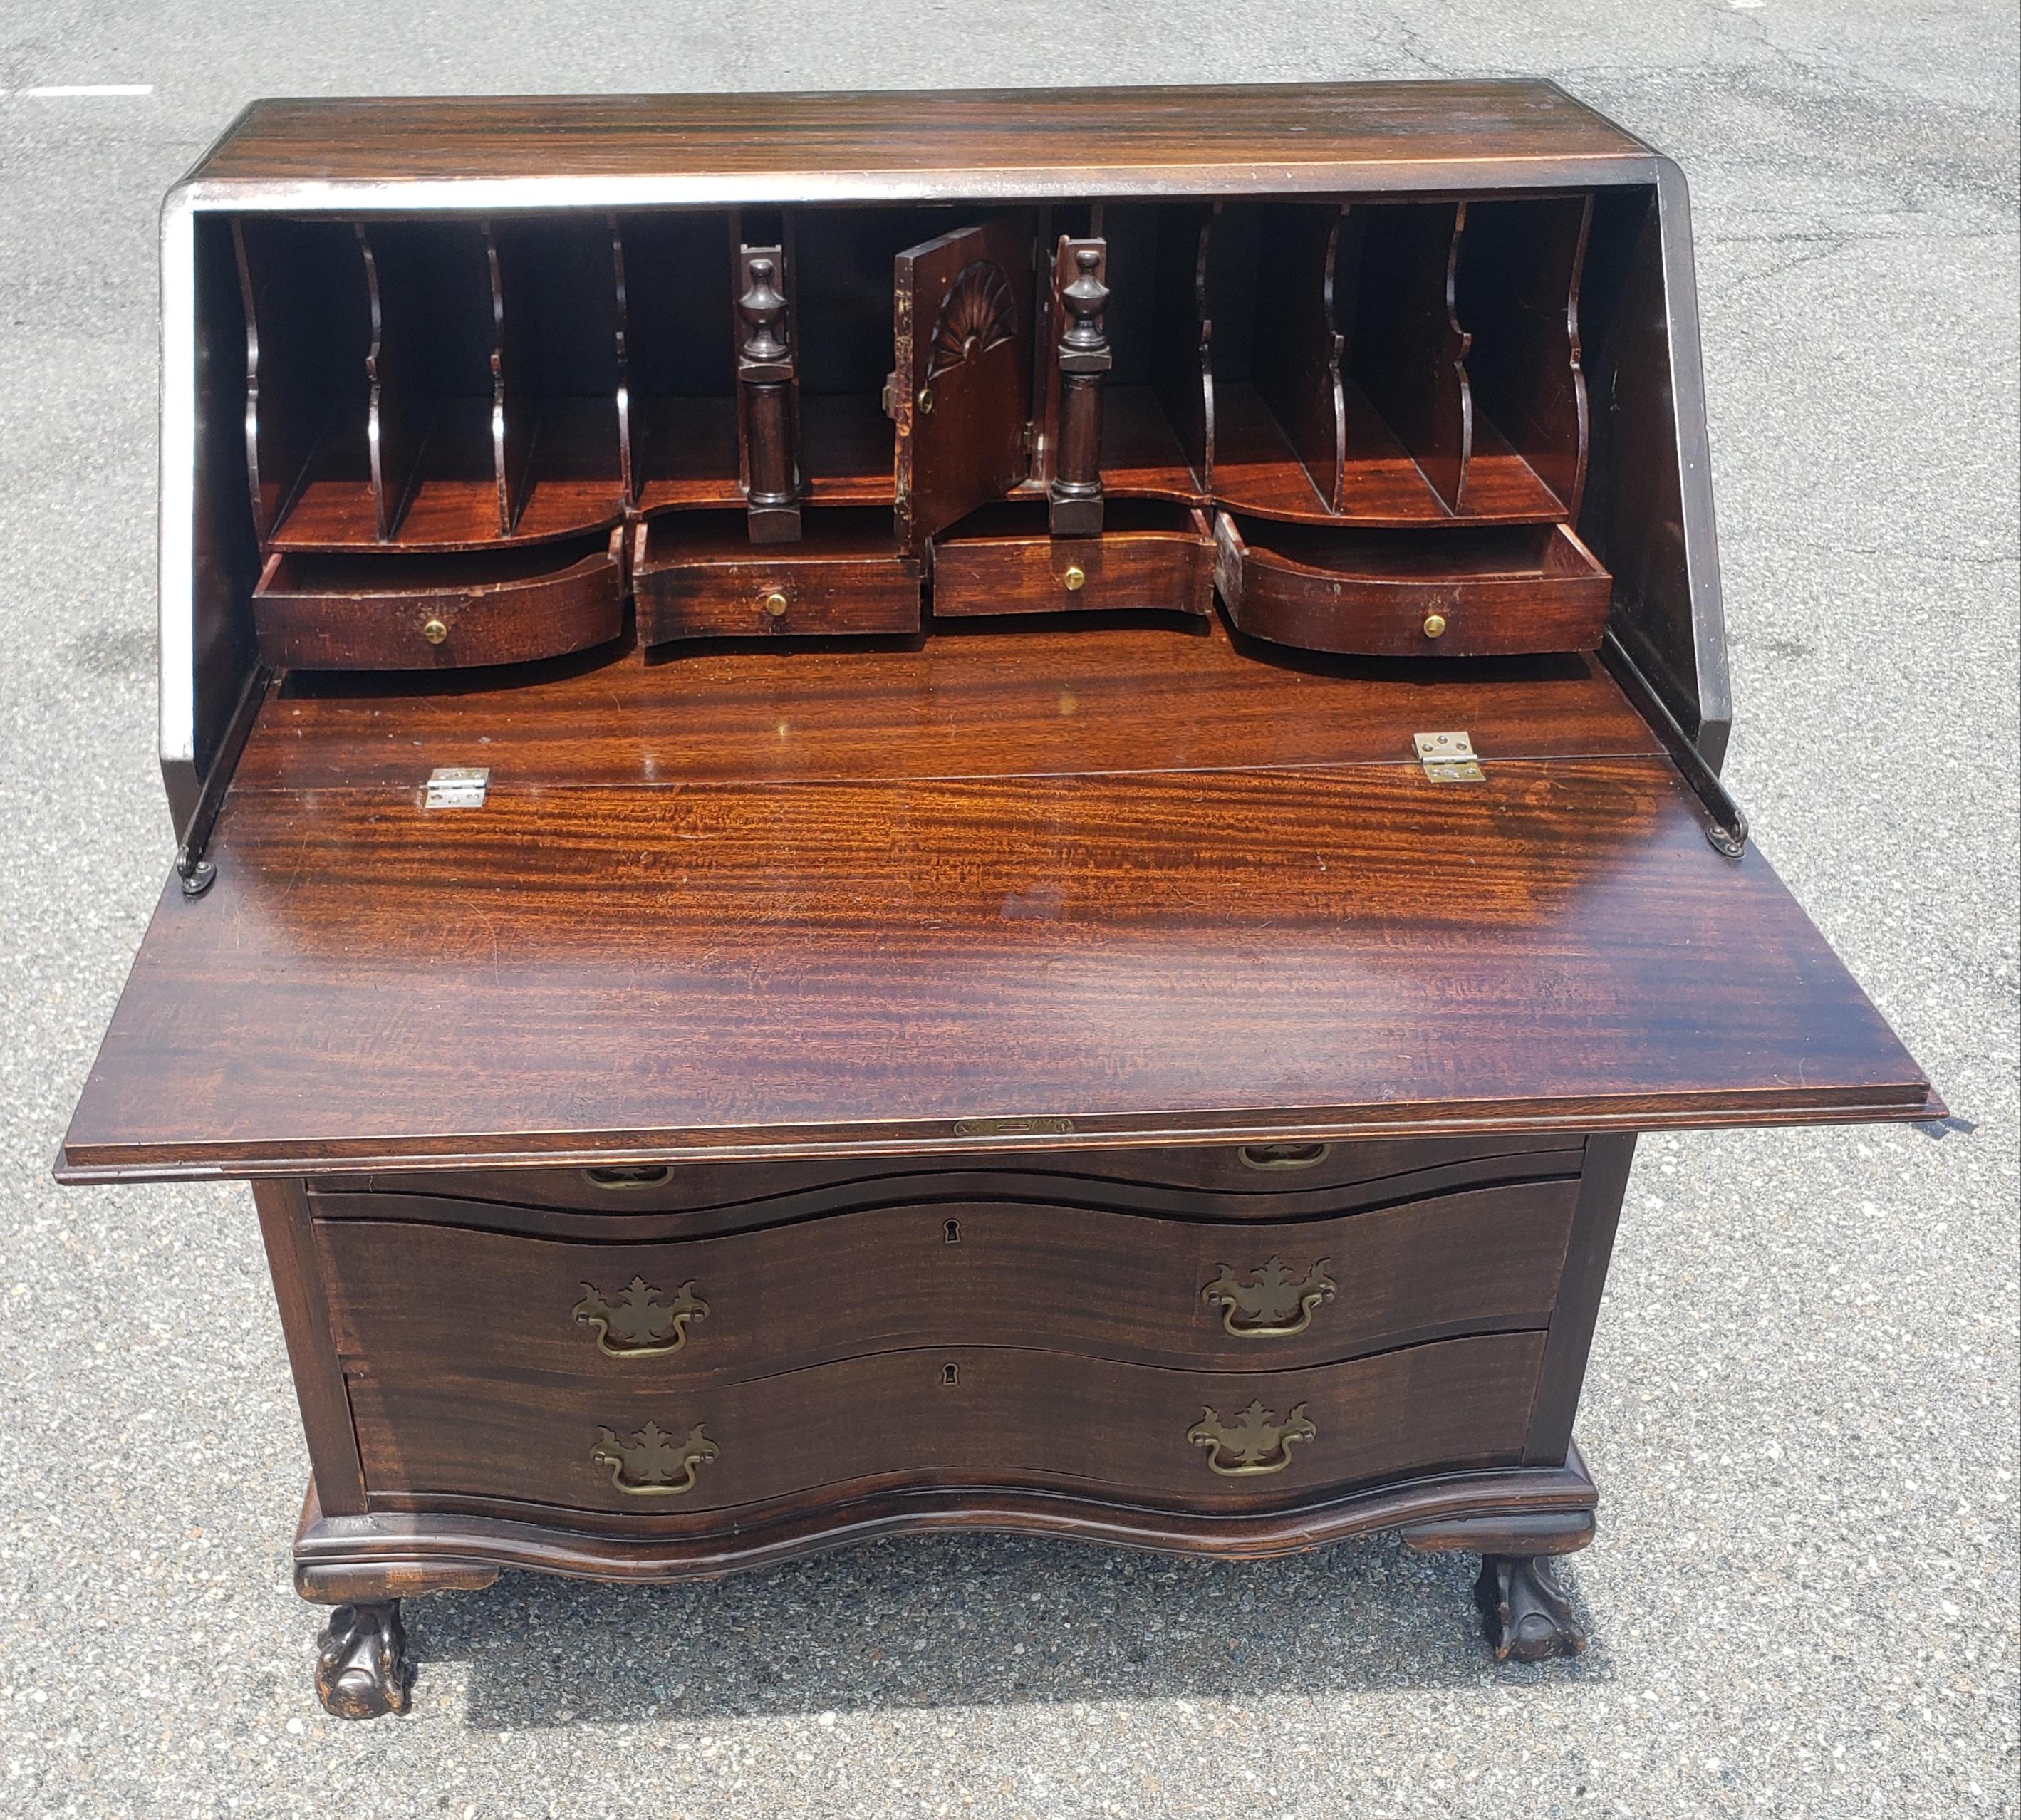 An early 20th century Chippendale Style Mahogany Oxbow Slant Front Secretary Desk. 4 dovetailed Serpentine drawers. Slant front door opens to reveal addition storage space with 5 small drawers and plenty of additional  storage space.
Measures 46